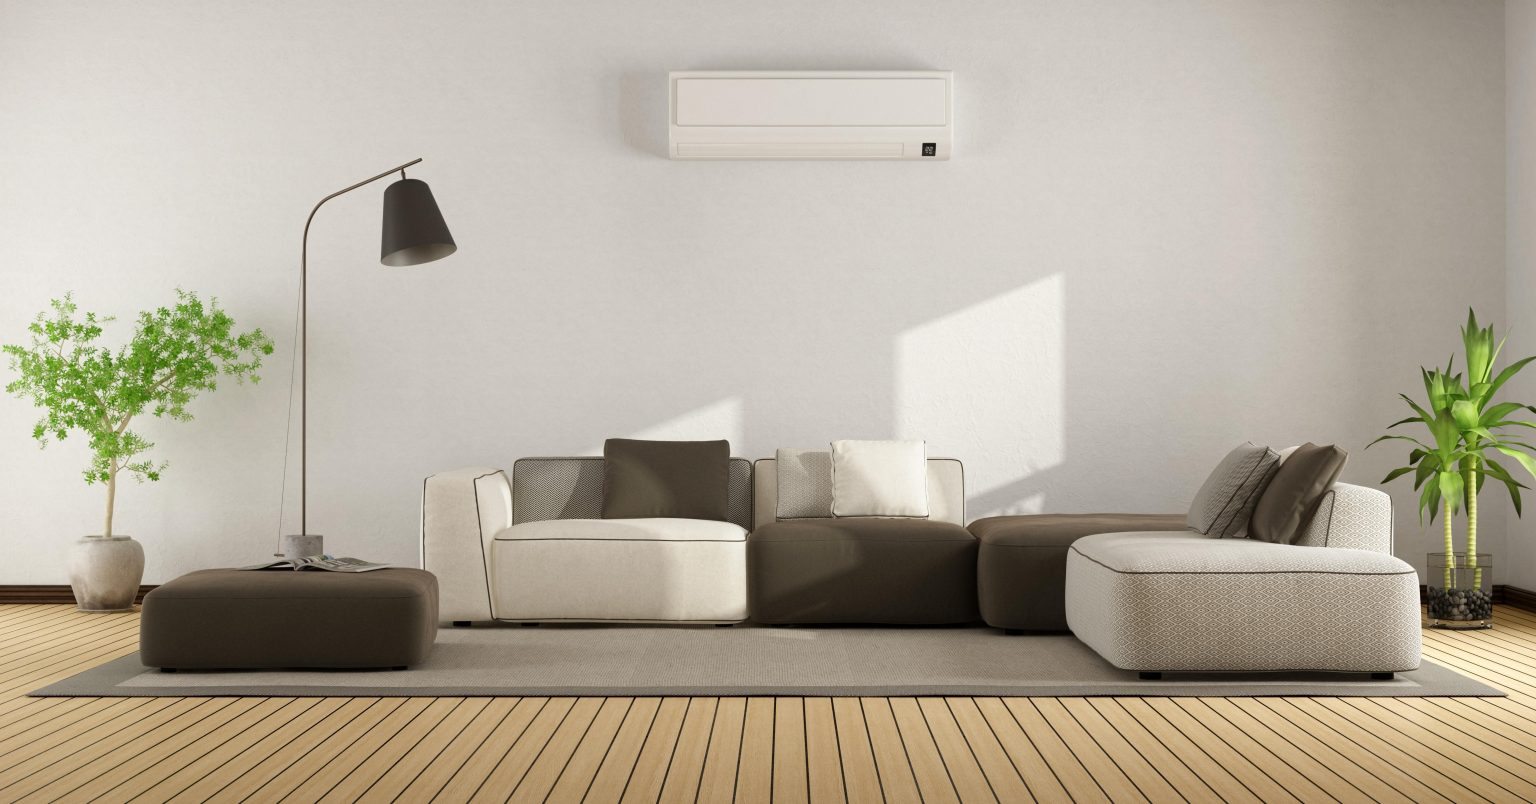 Air Conditioning Unit For Living Room